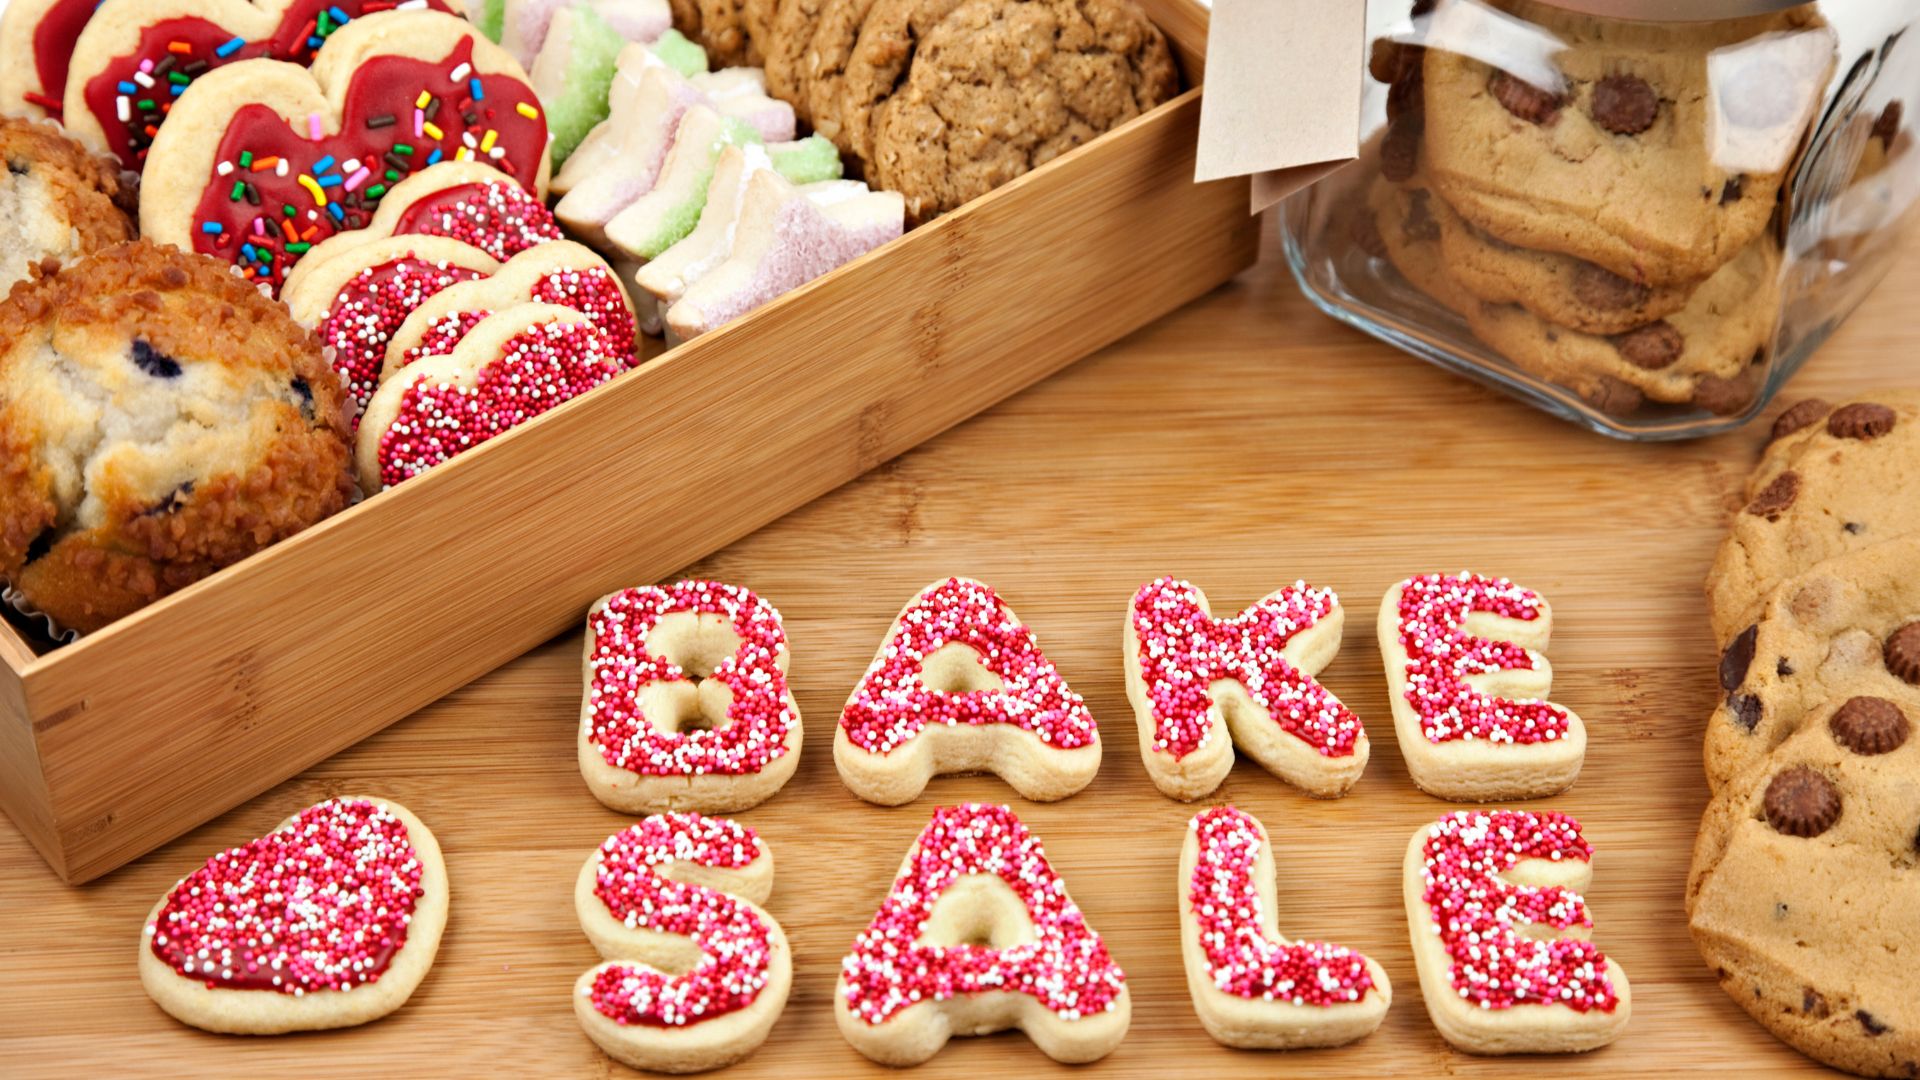 Cookies spell out the words "bake sale"